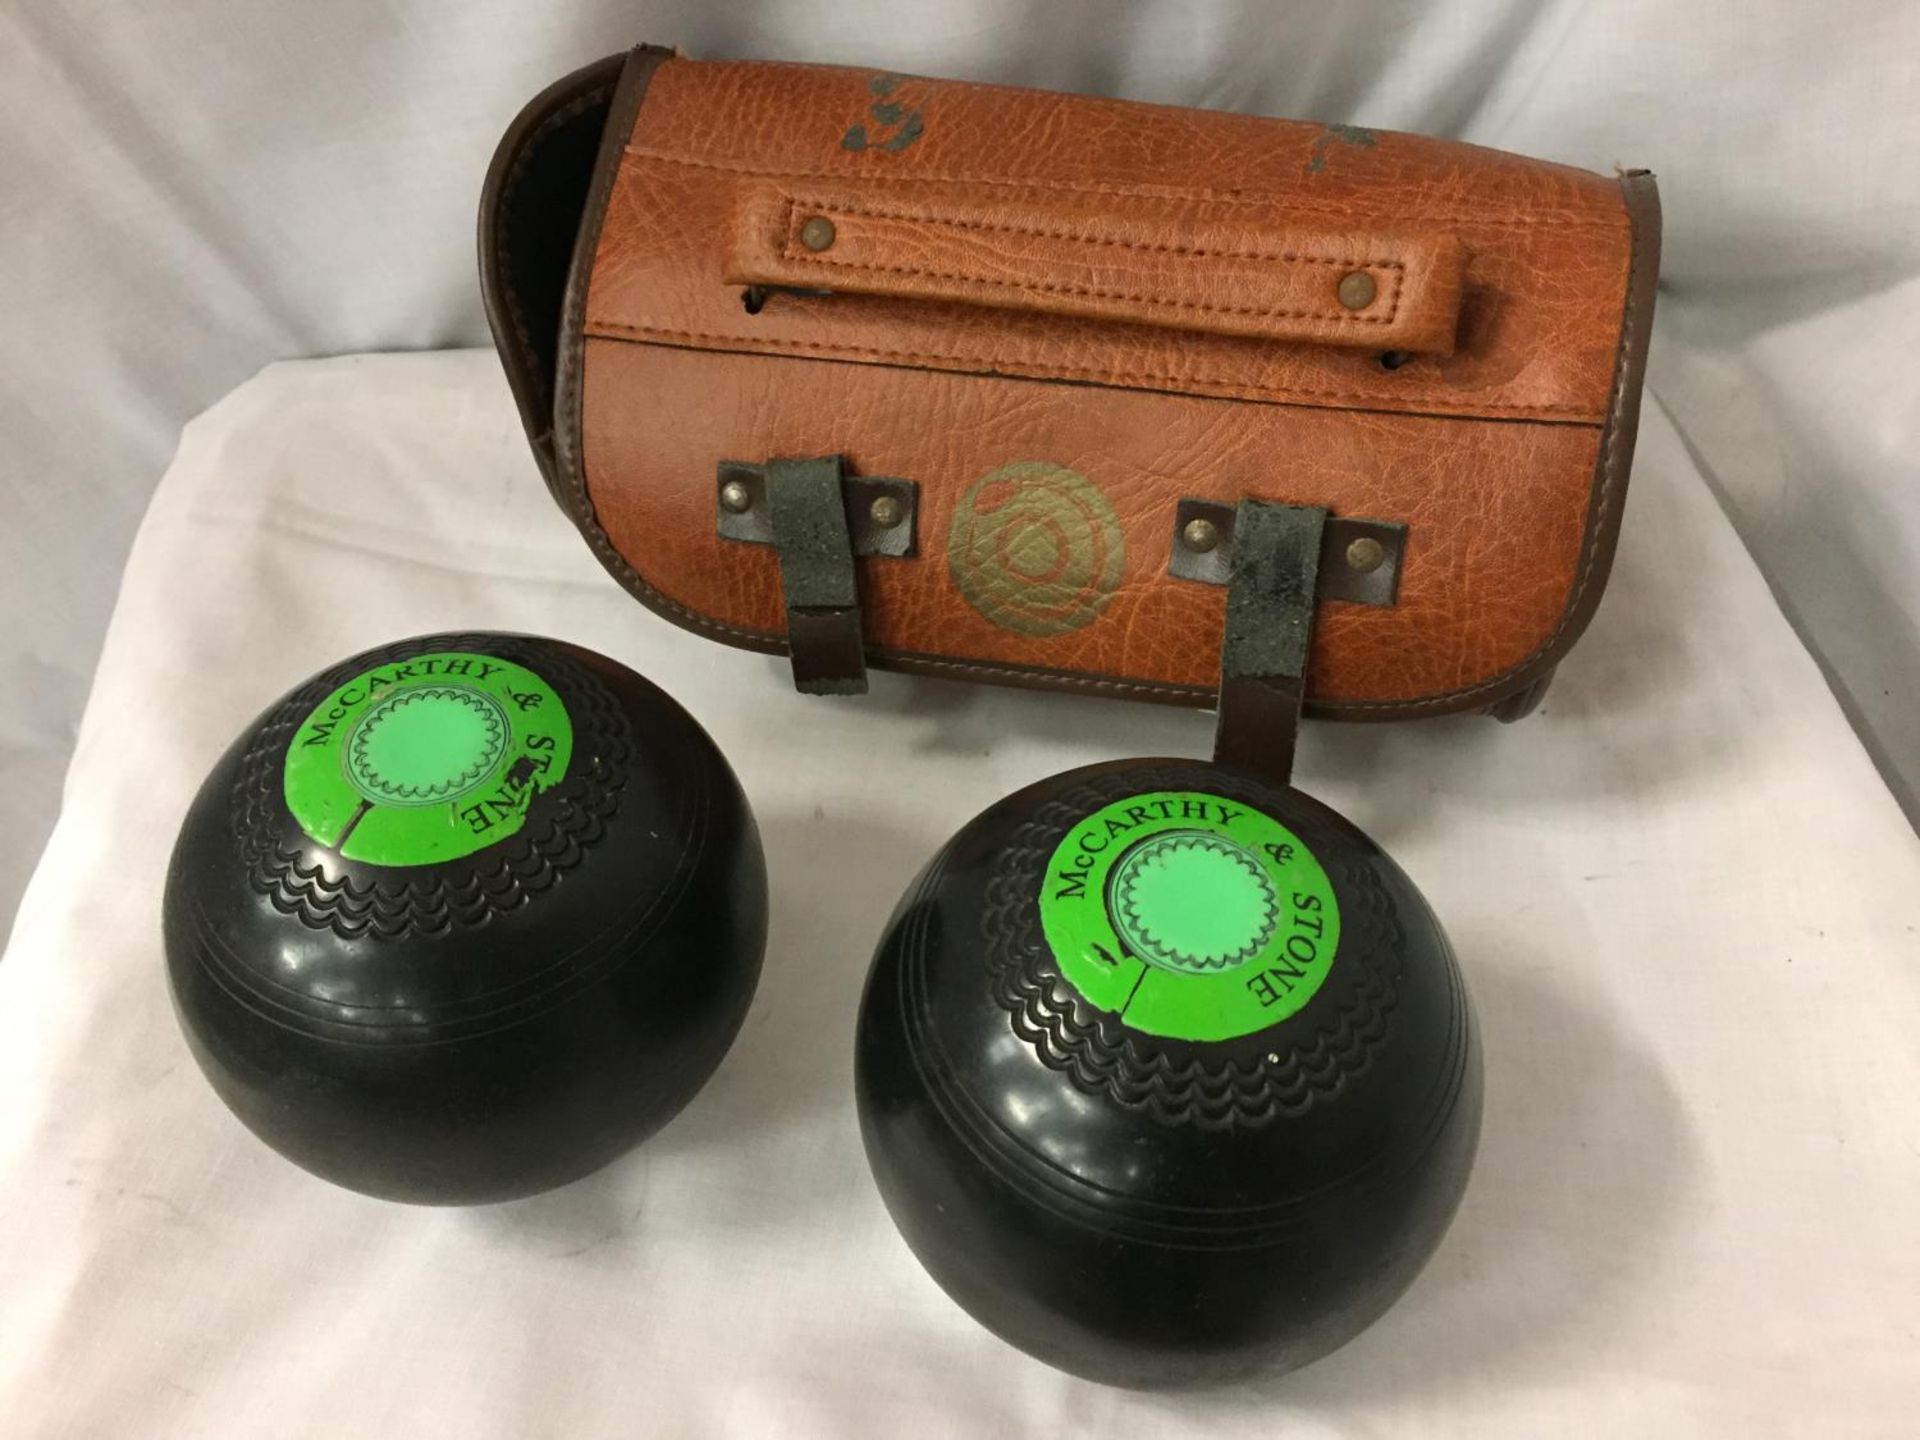 A PAIR OF TAYLOR TRIPLE CROWN BOWLS IN CARRYING CASE